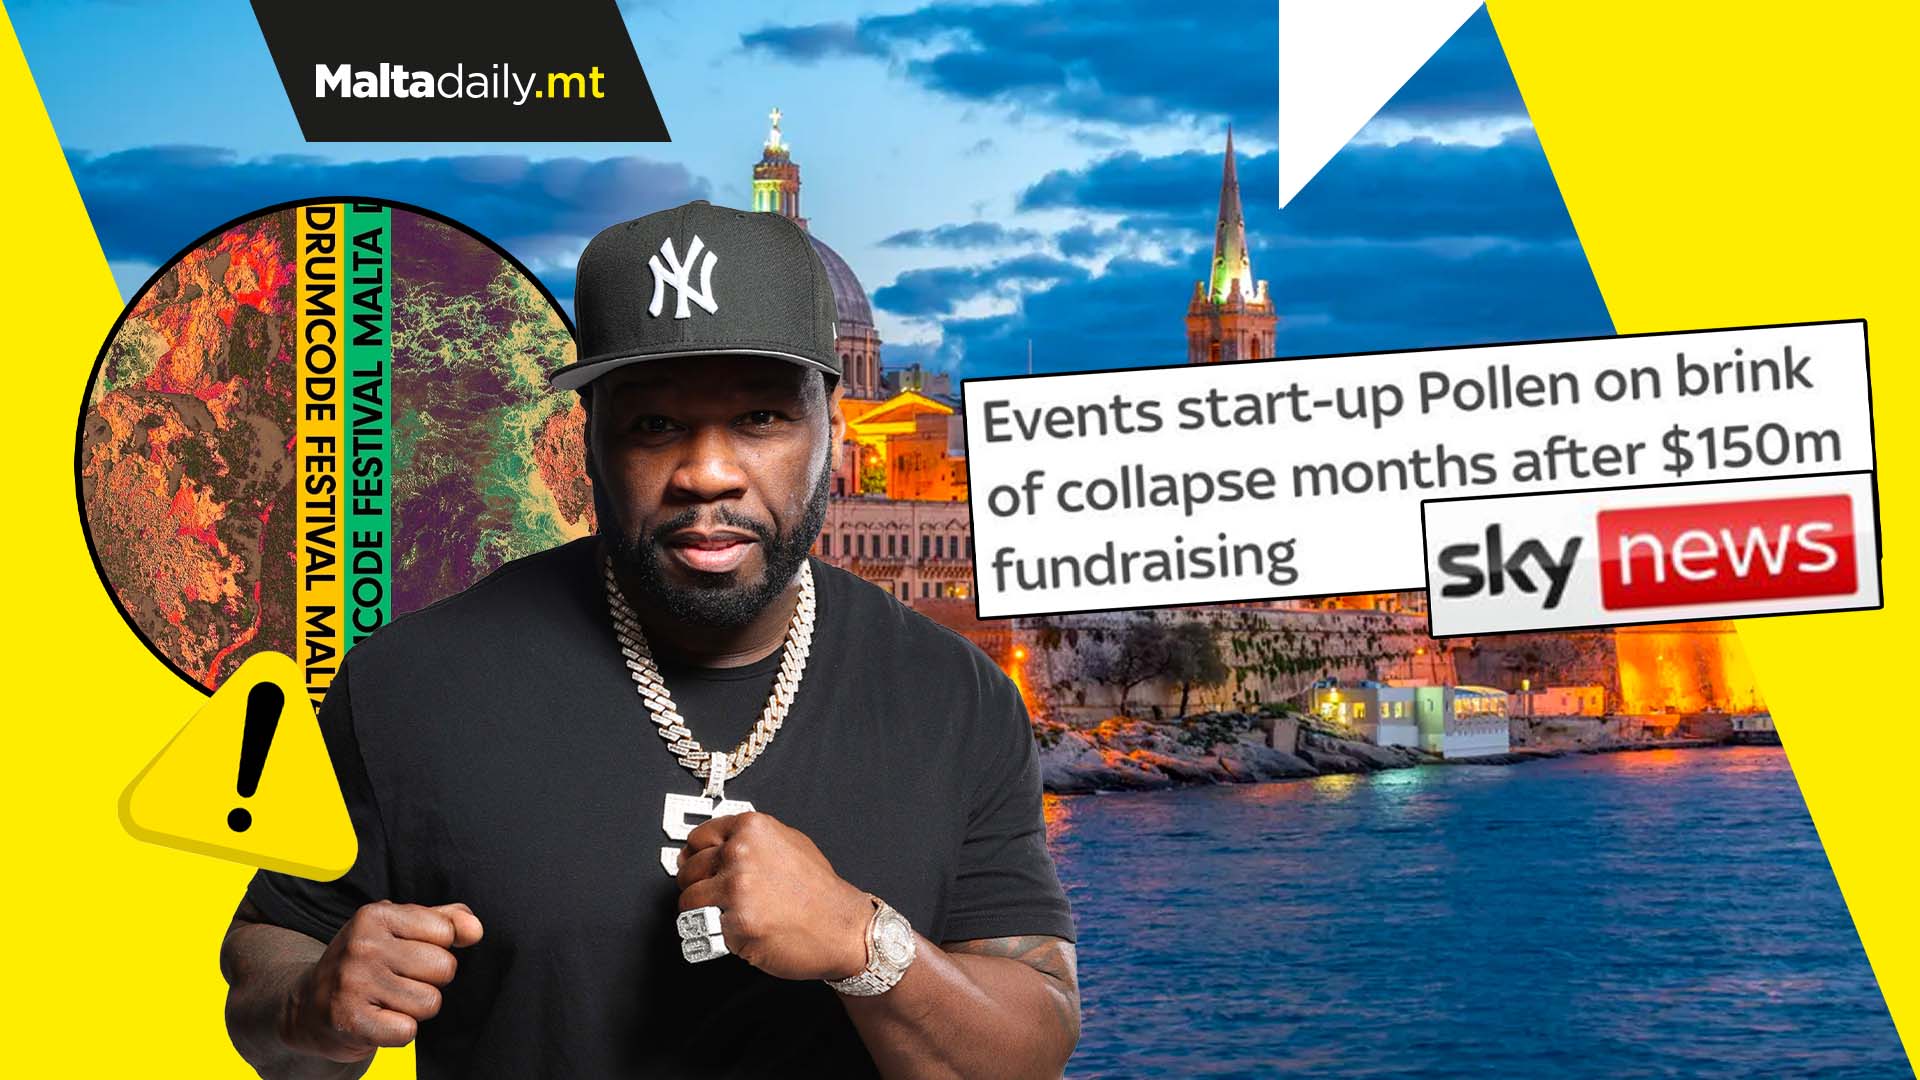 Doubts over 50 Cent’s Malta visit as DrumCode cancels event